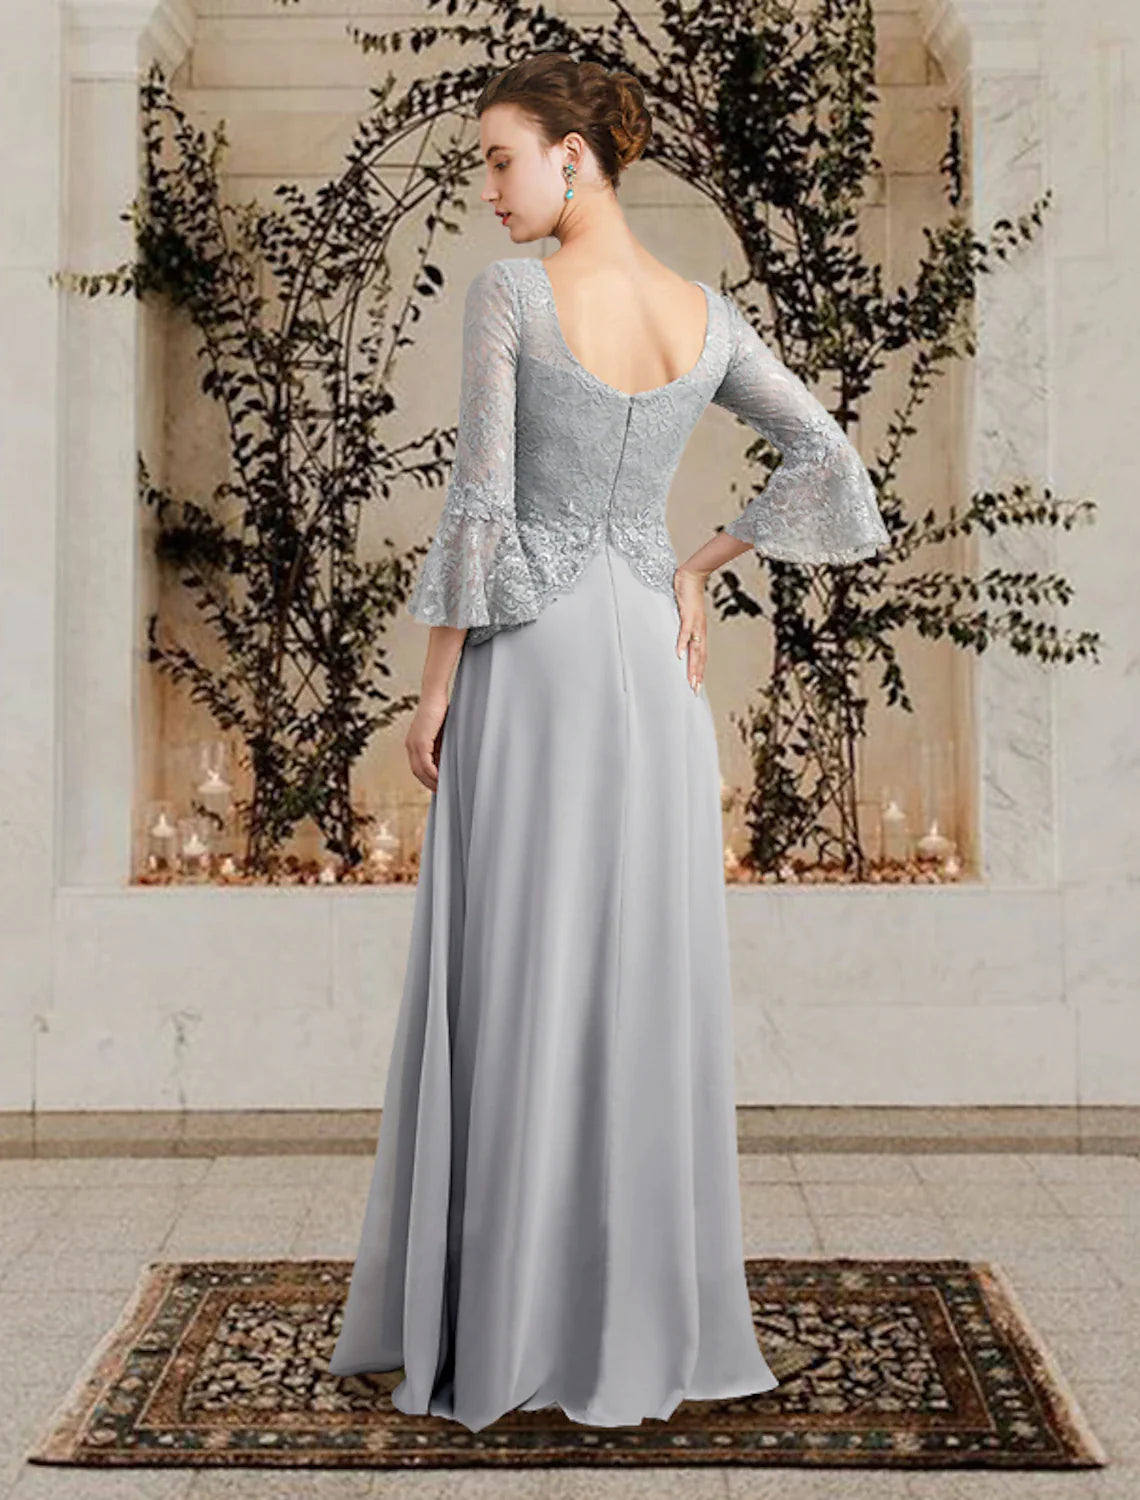 A-Line Mother of the Bride Dress Plus Size Elegant V Neck Floor Length Chiffon Lace 3/4 Length Sleeve with Pleats Sequin Appliques